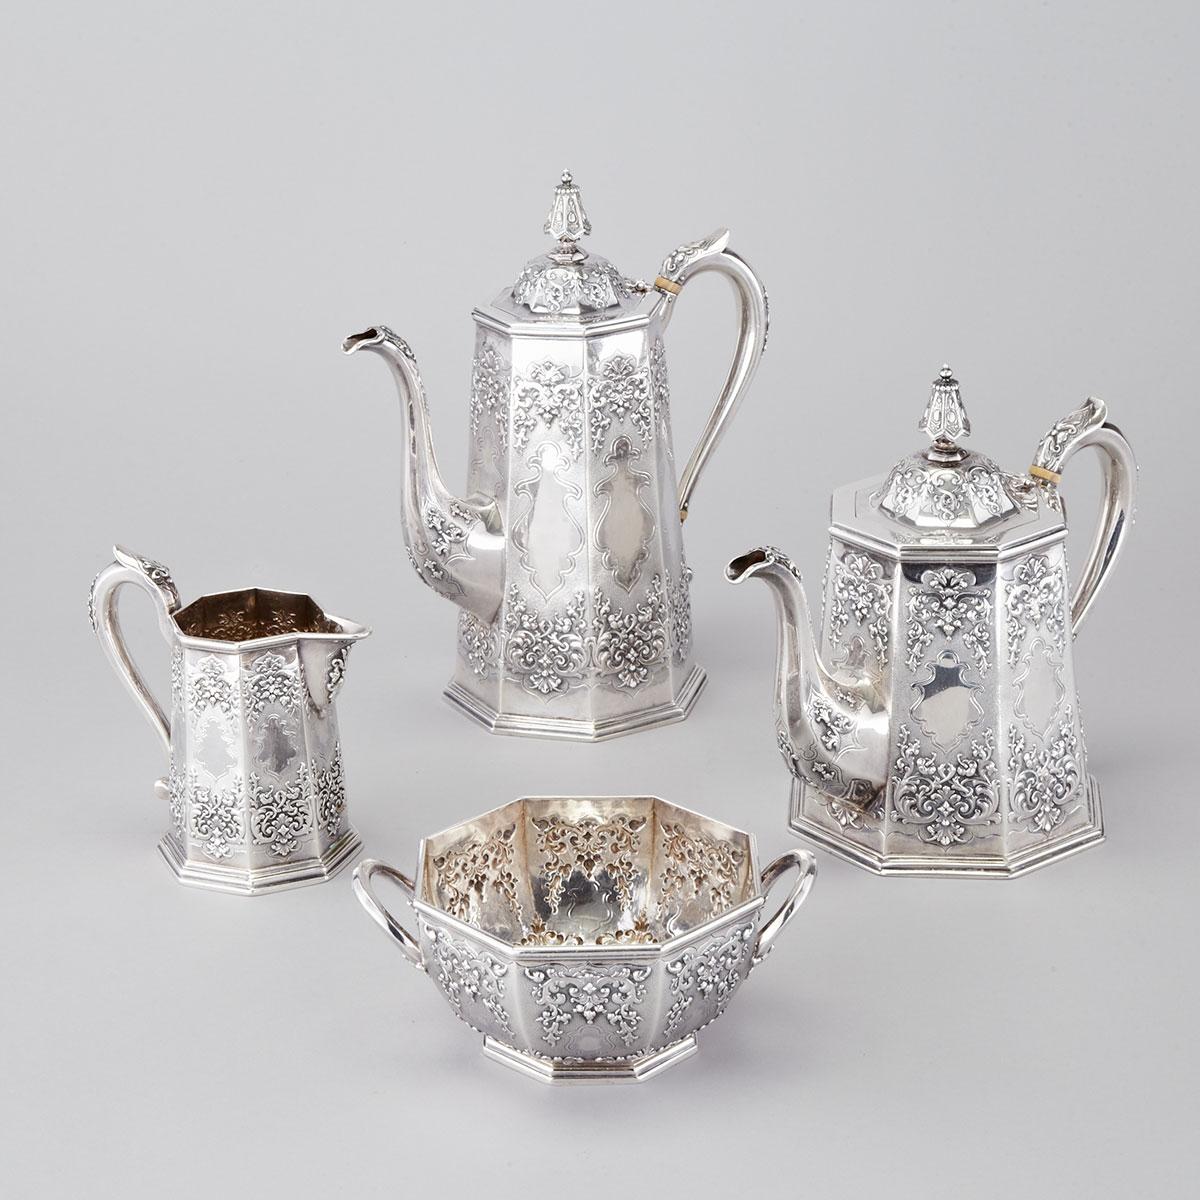 Victorian Silver Tea and Coffee Service, Robert Hennell IV, London, 1874